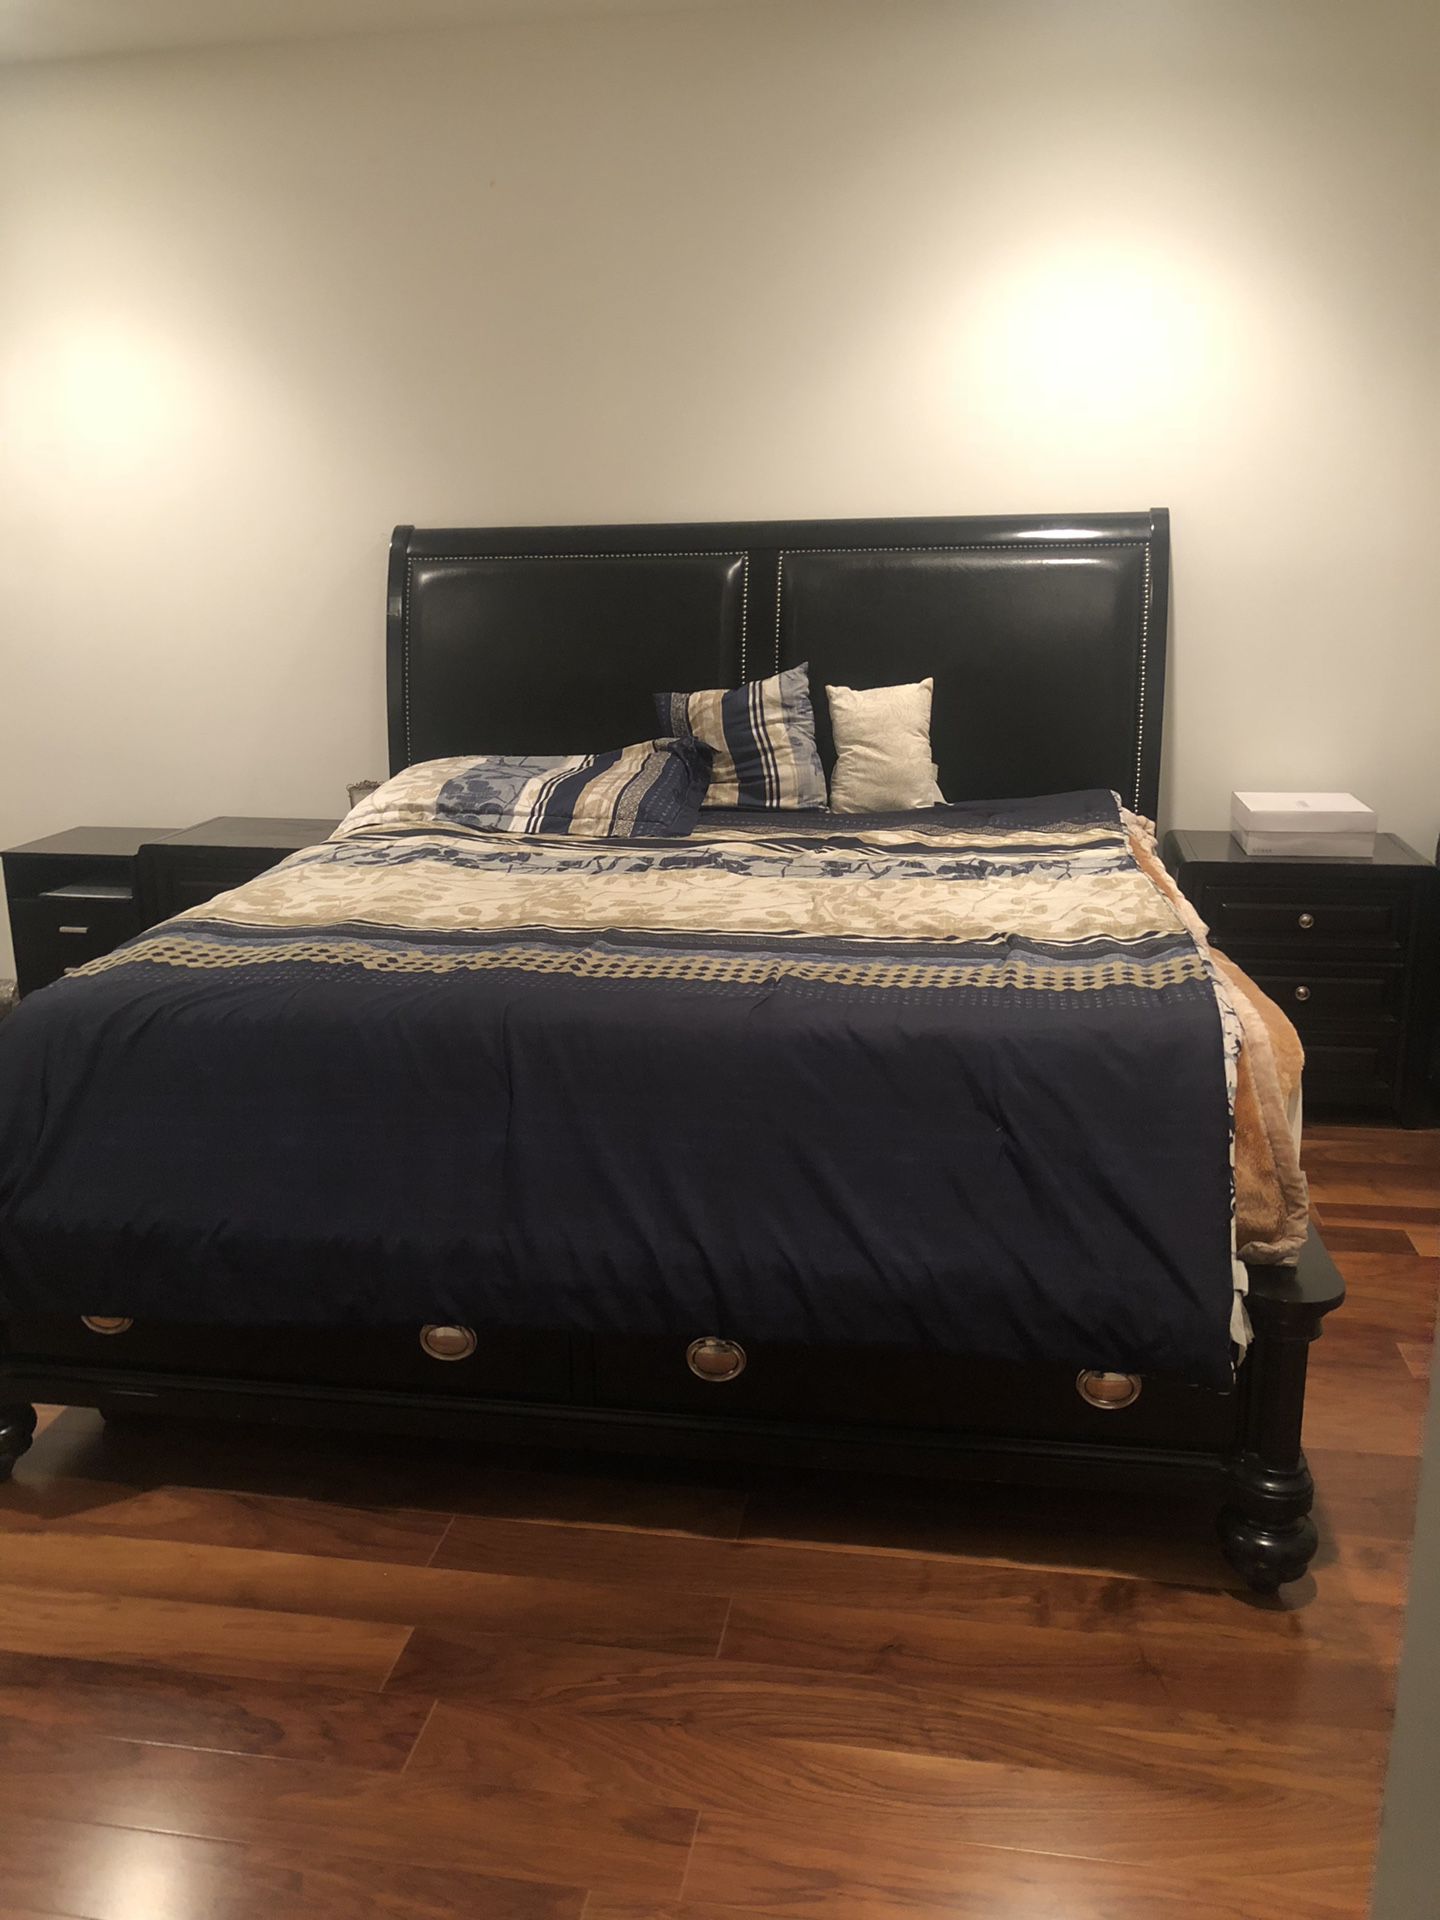 King bedroom set including mattress, 2 side drawers and 2 drawers on the bottom of bed for more storage